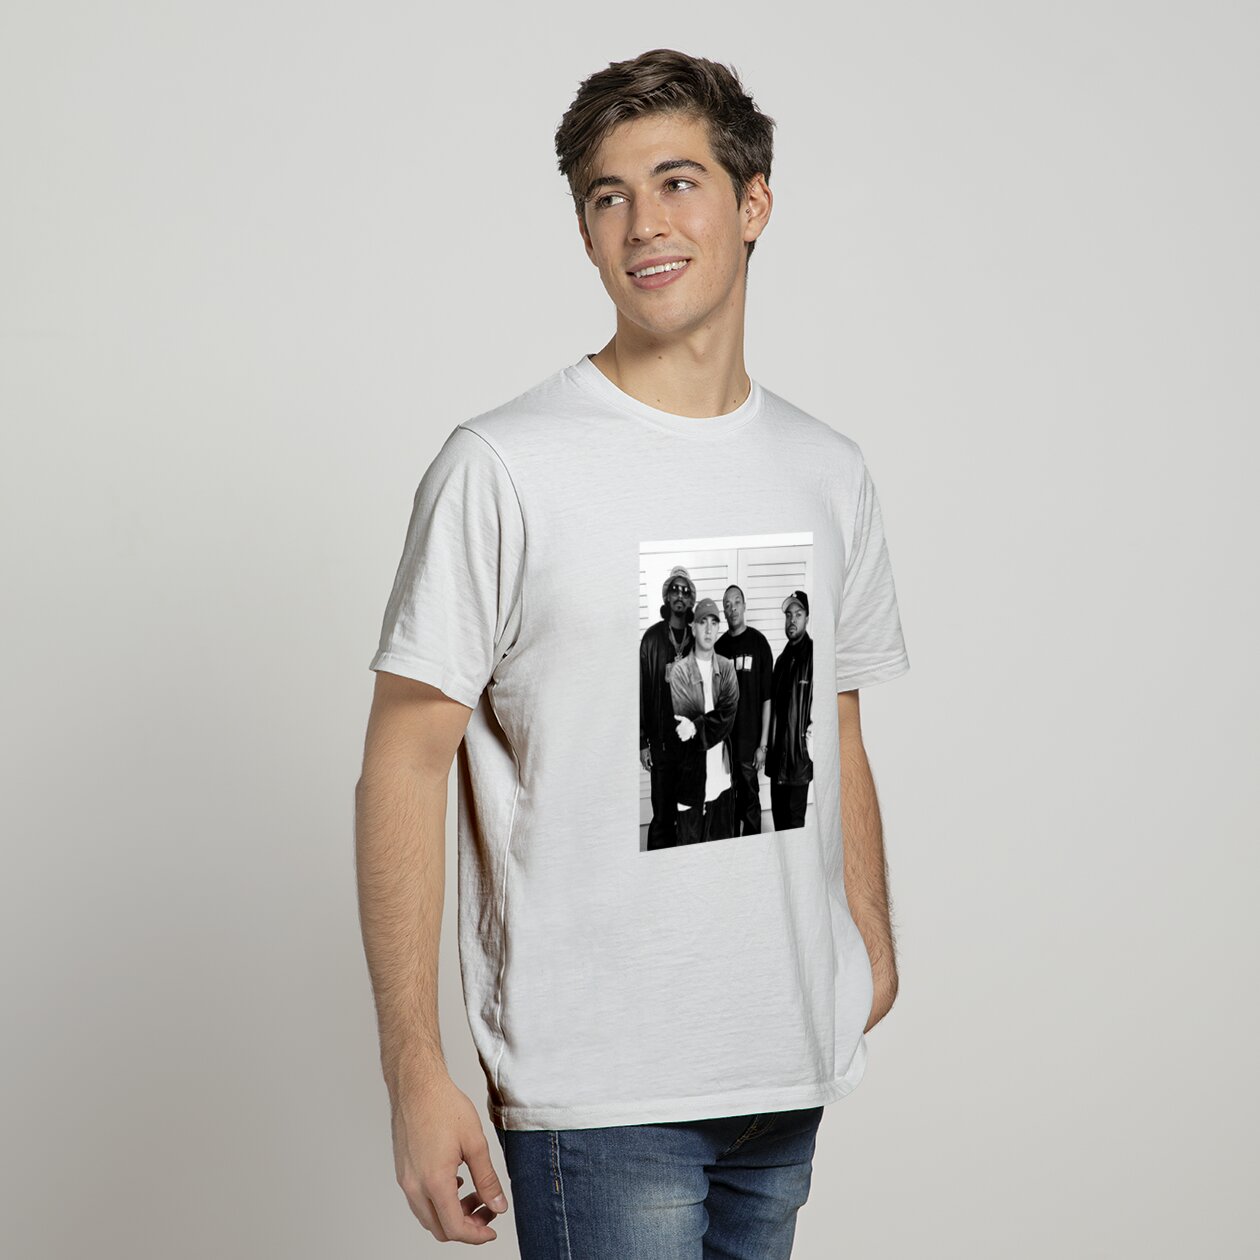 Legends of Hip Hop Vintage Graphic Tee featuring Eminem, Dr. Dre, Ice Cube, and Snoop Dogg DZT